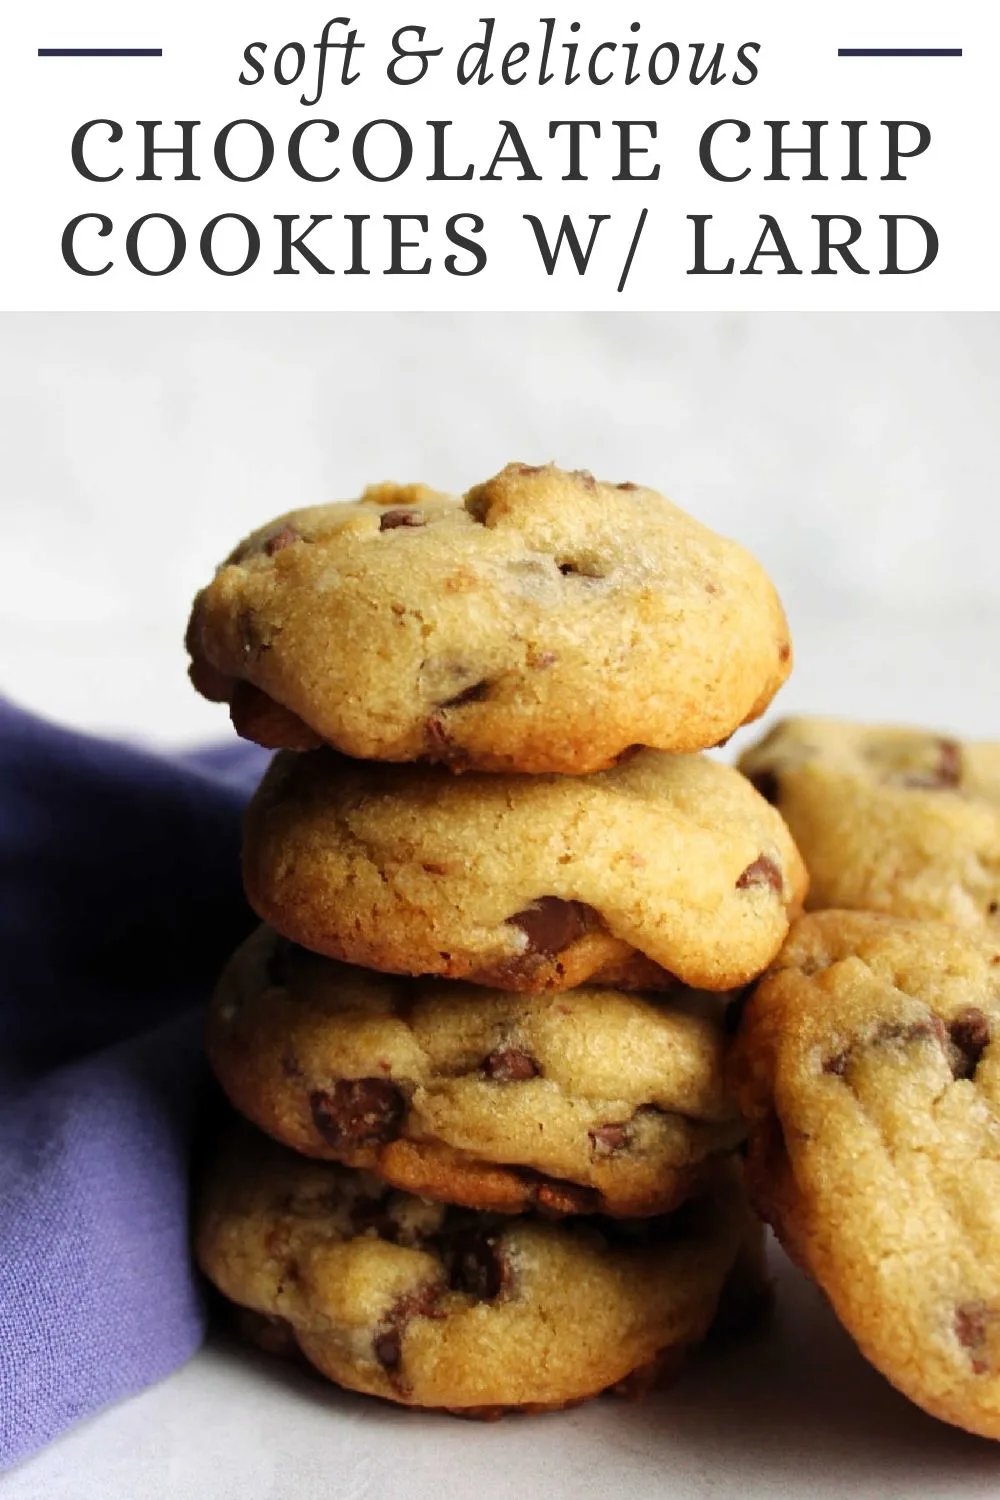 These chocolate chip cookies have a surprise ingredient, they are made with lard instead of butter or shortening. They are a great way to use rendered lard and they taste amazing.